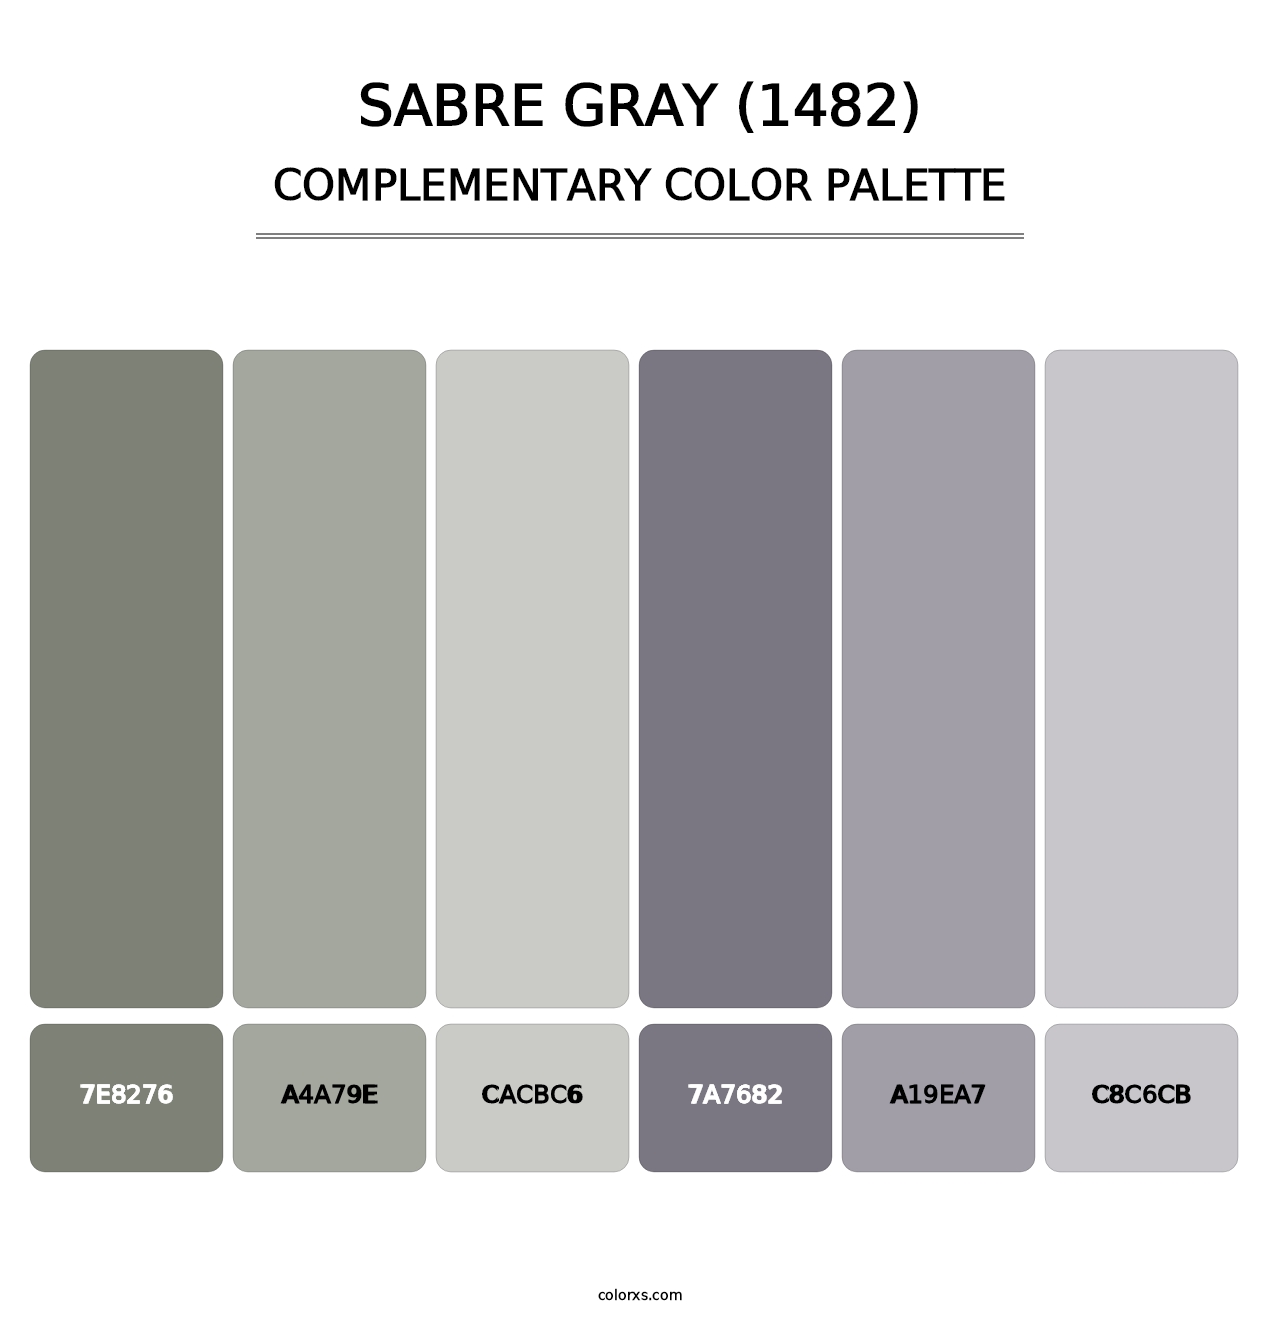 Sabre Gray (1482) - Complementary Color Palette